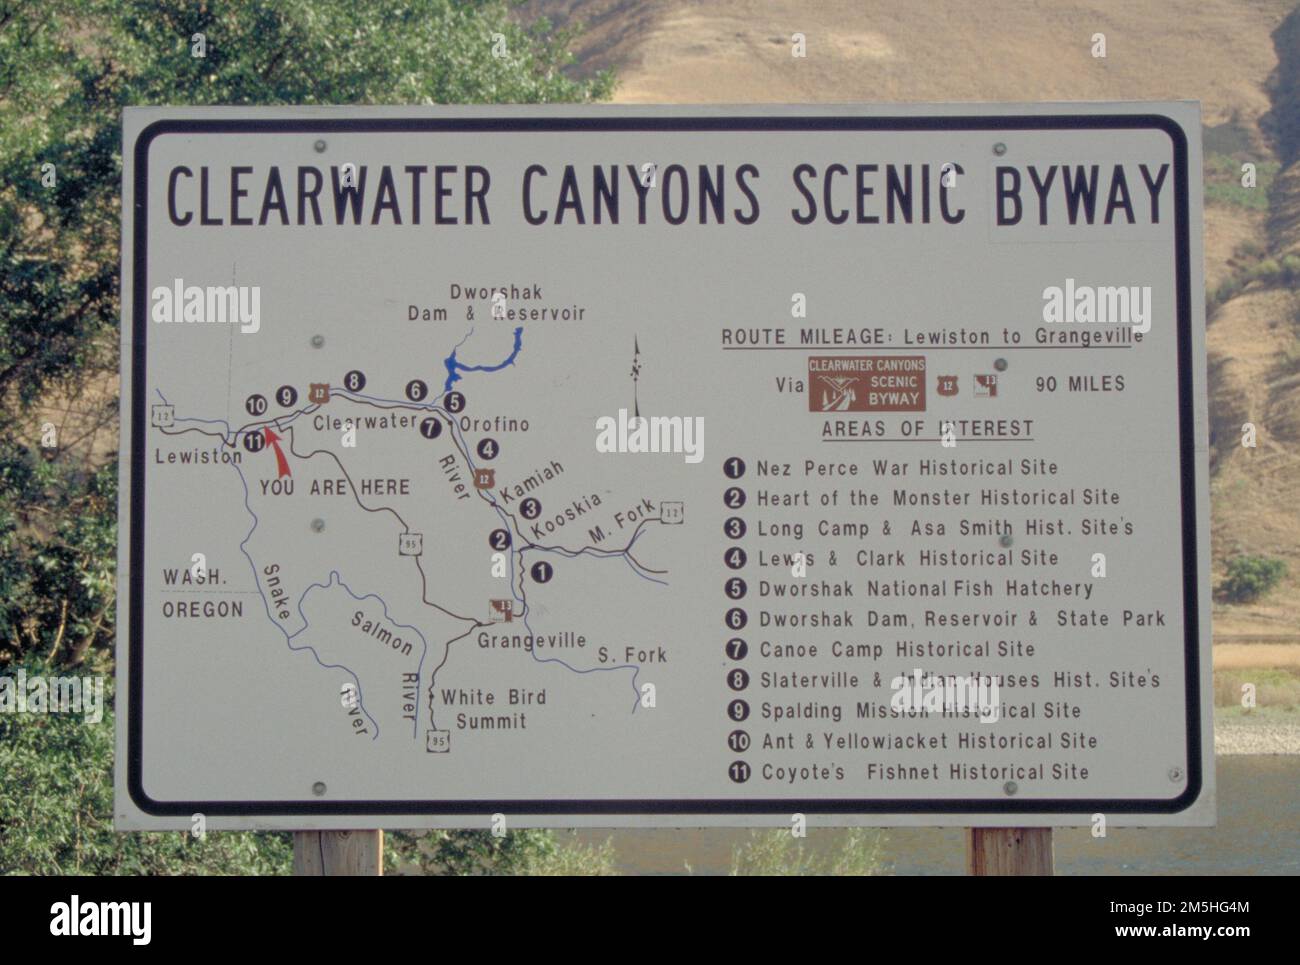 Northwest Passage Scenic Byway - Sign for Clearwater Canyons Scenic Byway. Sign shows byway route and points of interest. This Idaho byway has since been renamed to 'Northwest Passage Scenic Byway' and this sign is no longer used on the route. Location: Idaho (46.148° N 115.596° W) Stock Photo